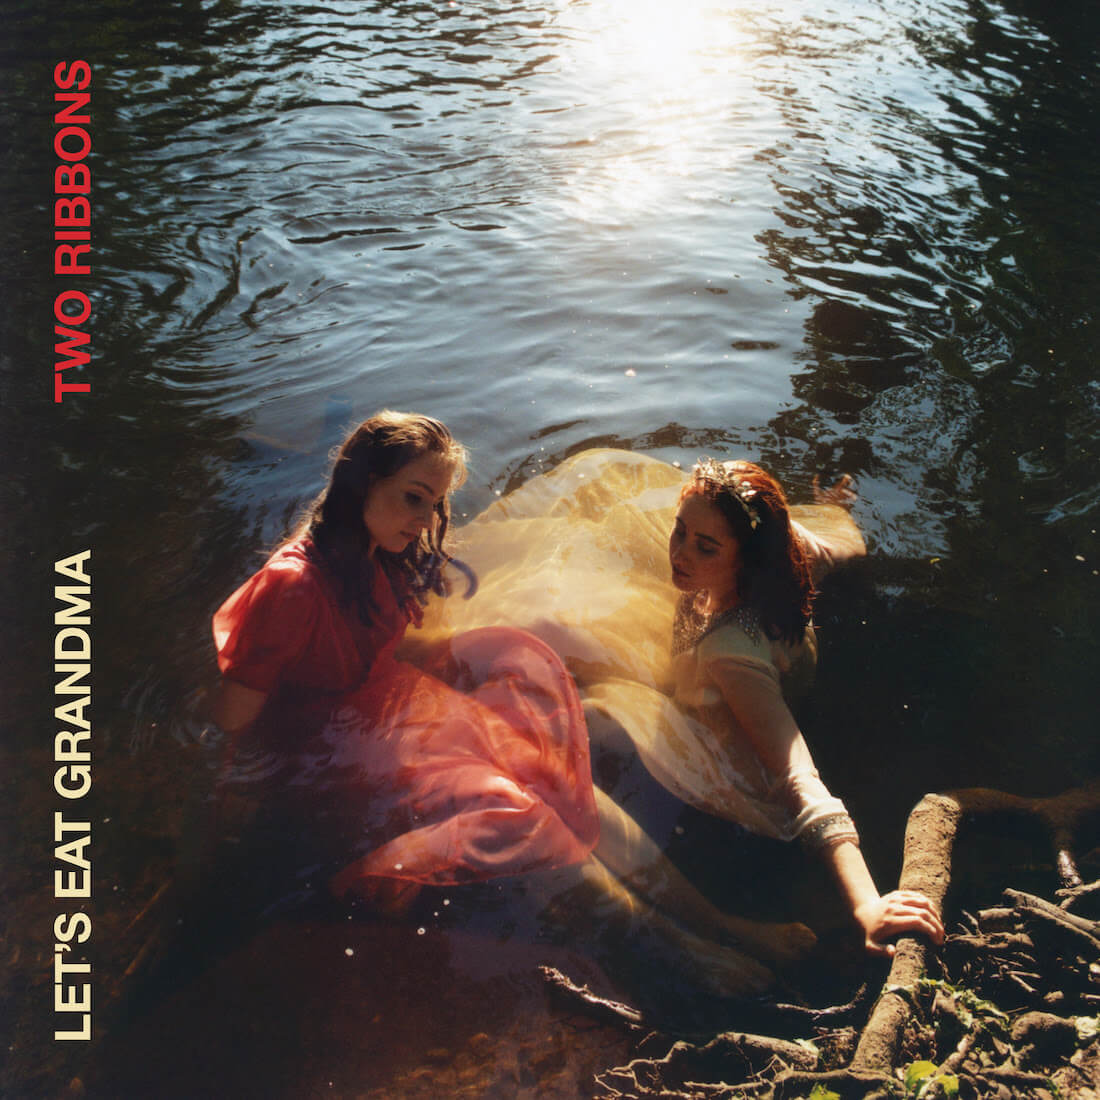 Two Ribbons by Let's Eat Grandma Album Review by Greg Walker for Northern Transmissions